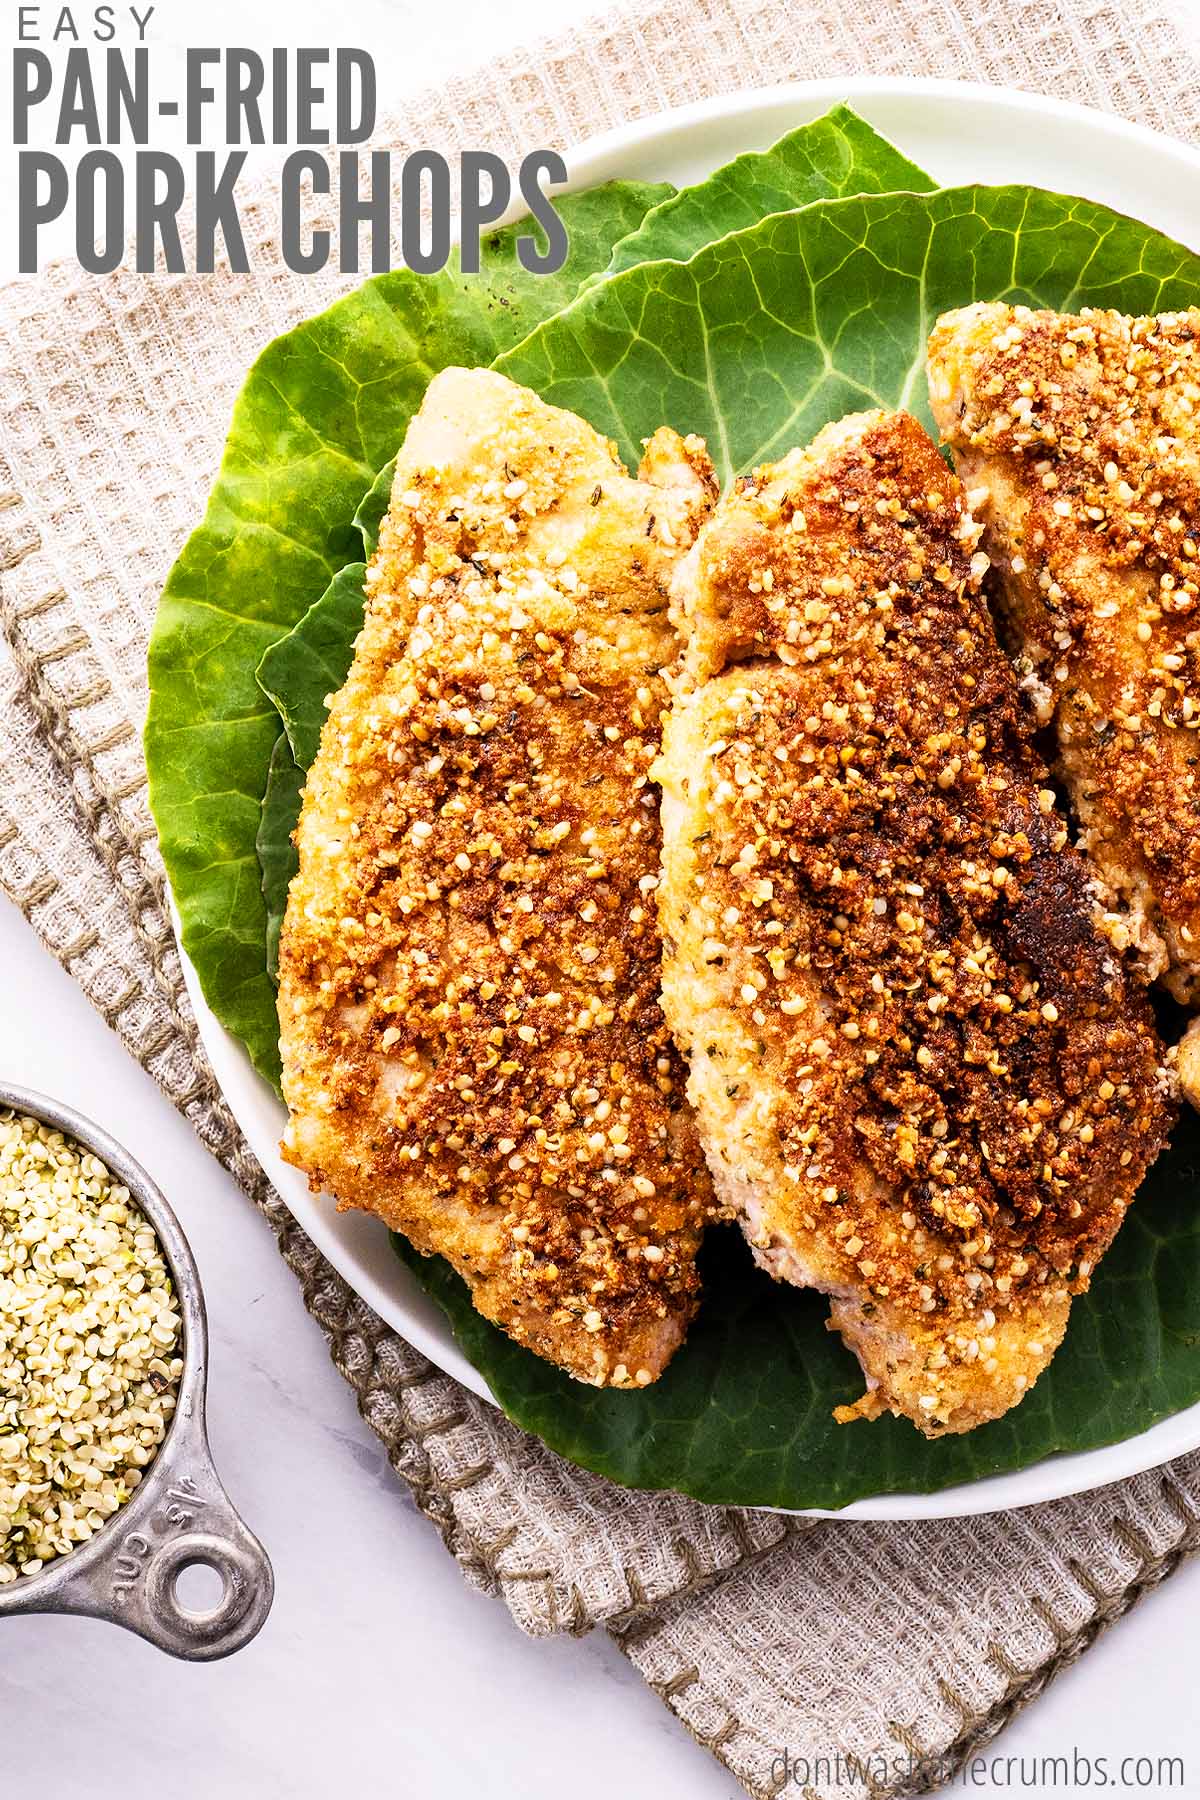 A delicious alternative to traditional breadcrumbs, these hemp and herb crusted pork chops are pan-fried in coconut oil and are so delicious!